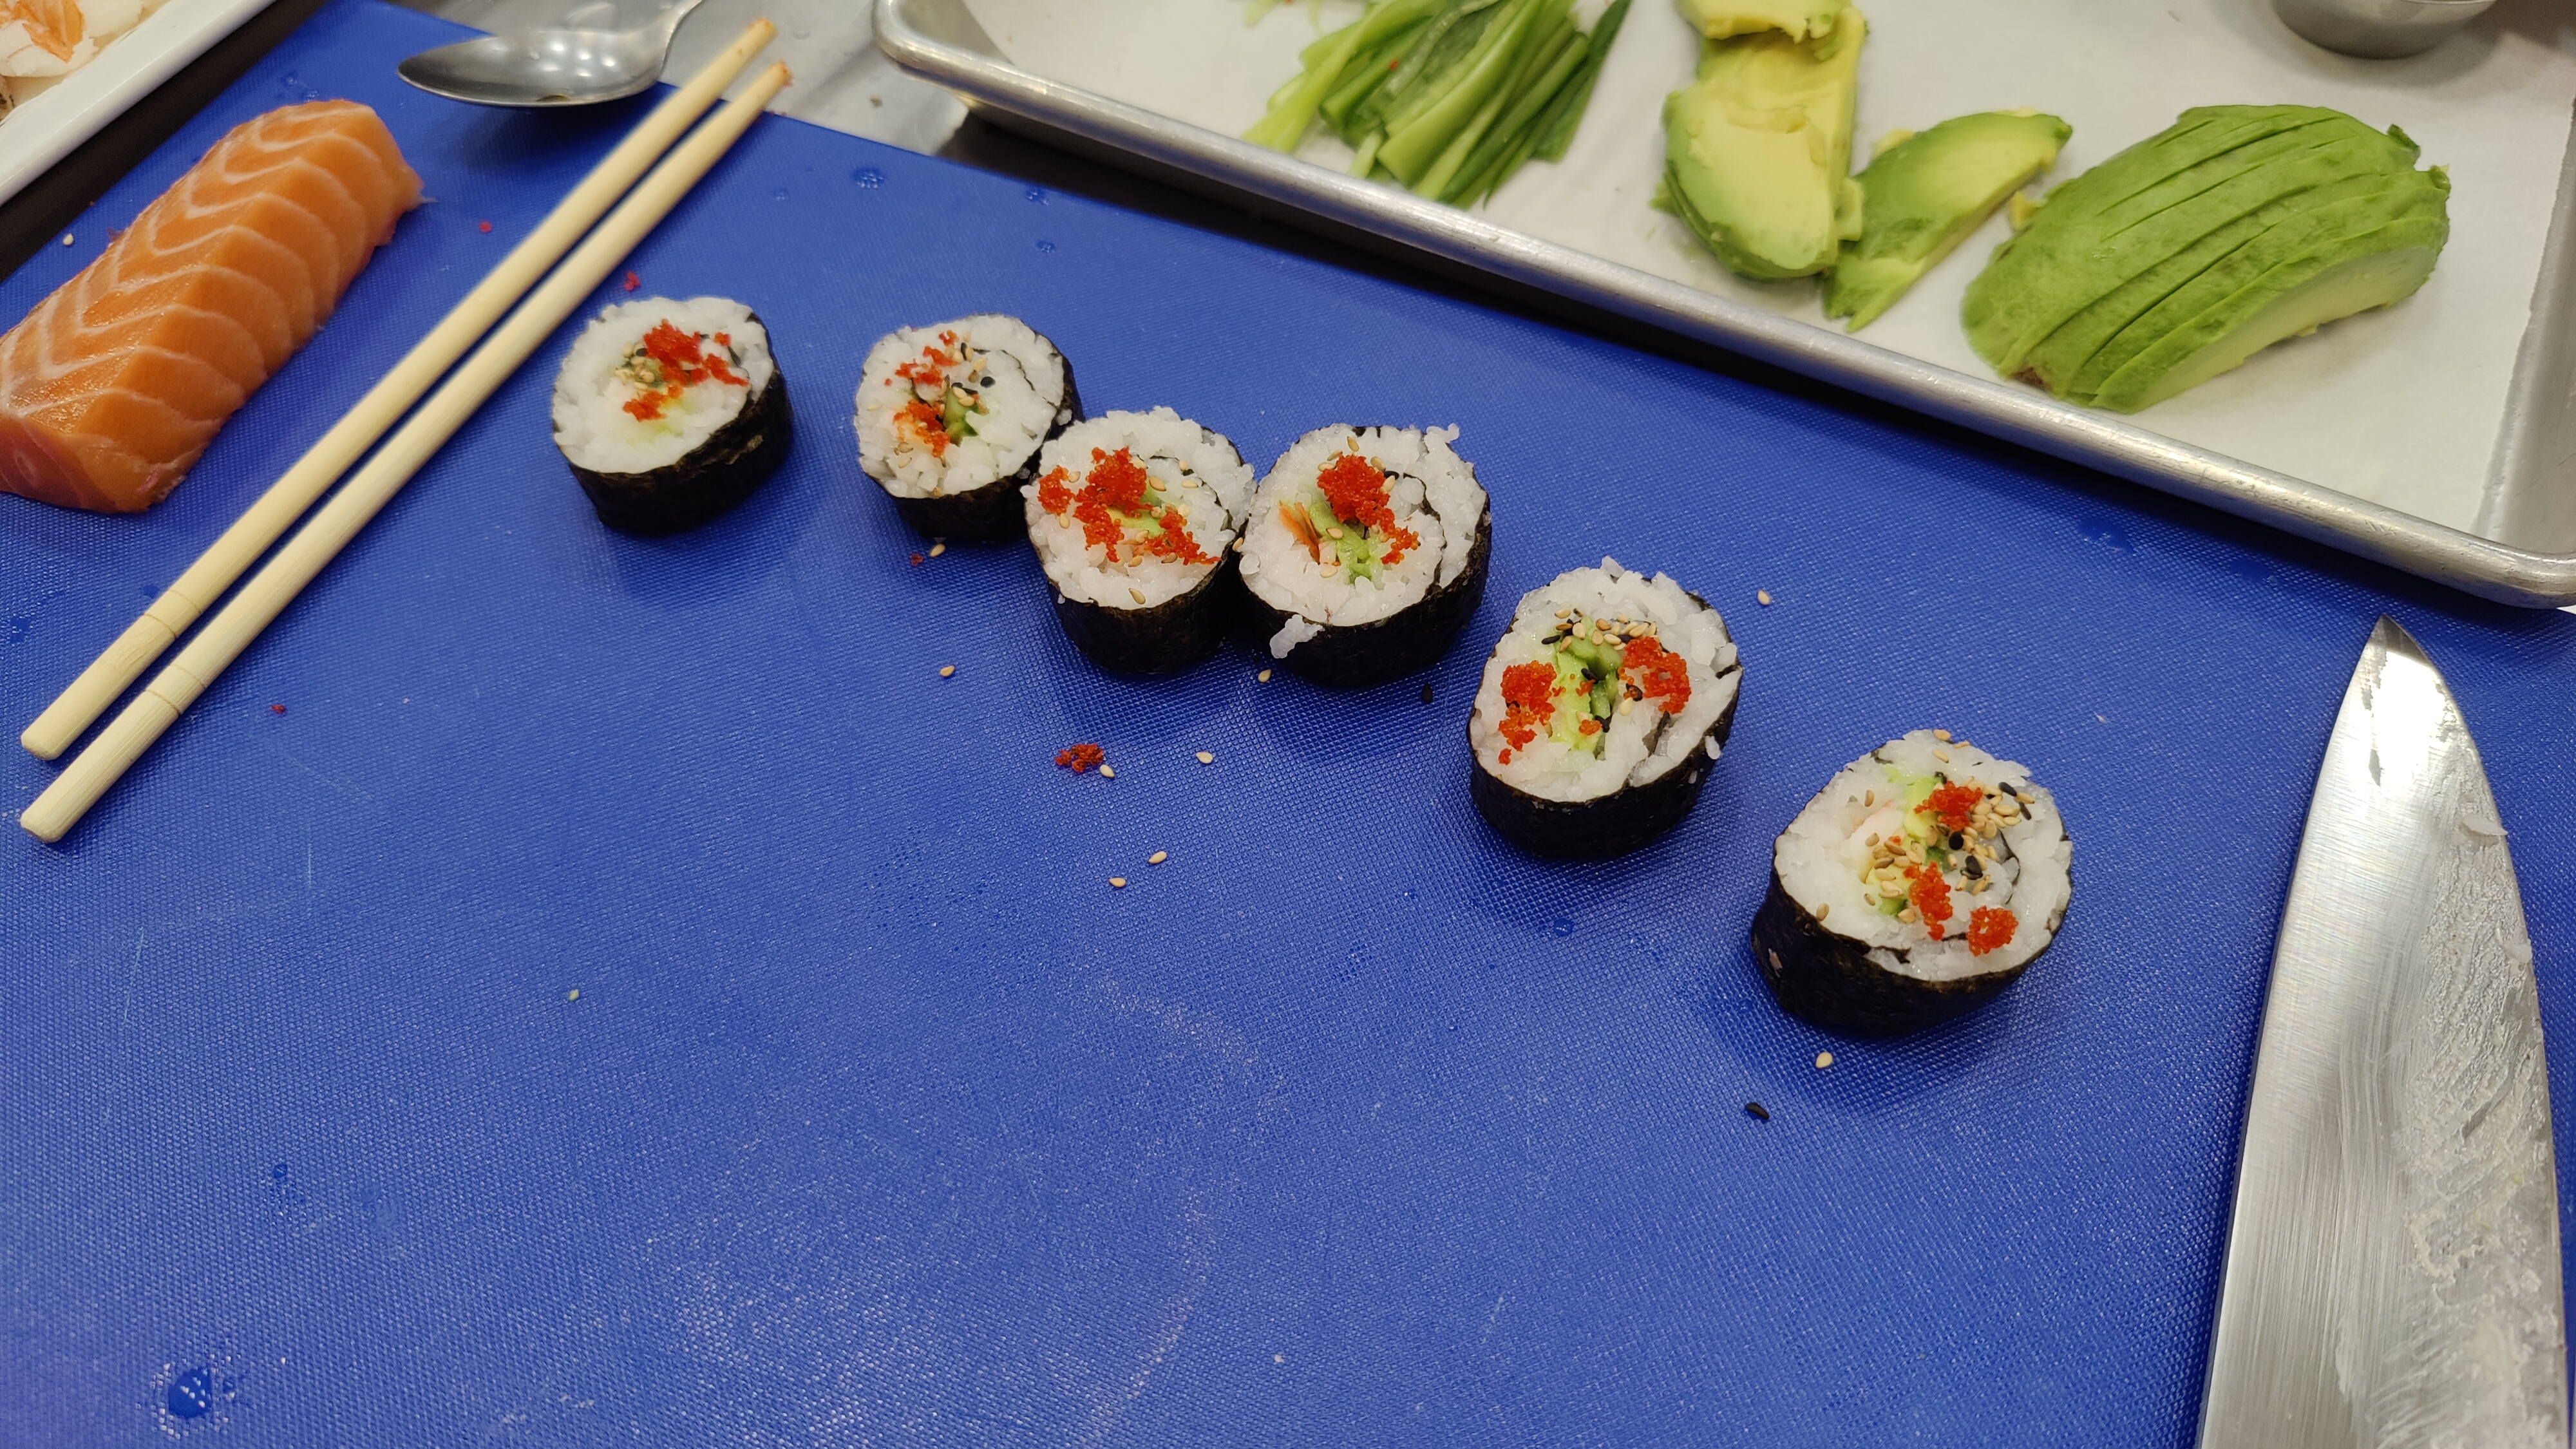 Six maki sit on the cutting board. There are toasted sesame seeds and roe on top. They are delicious.